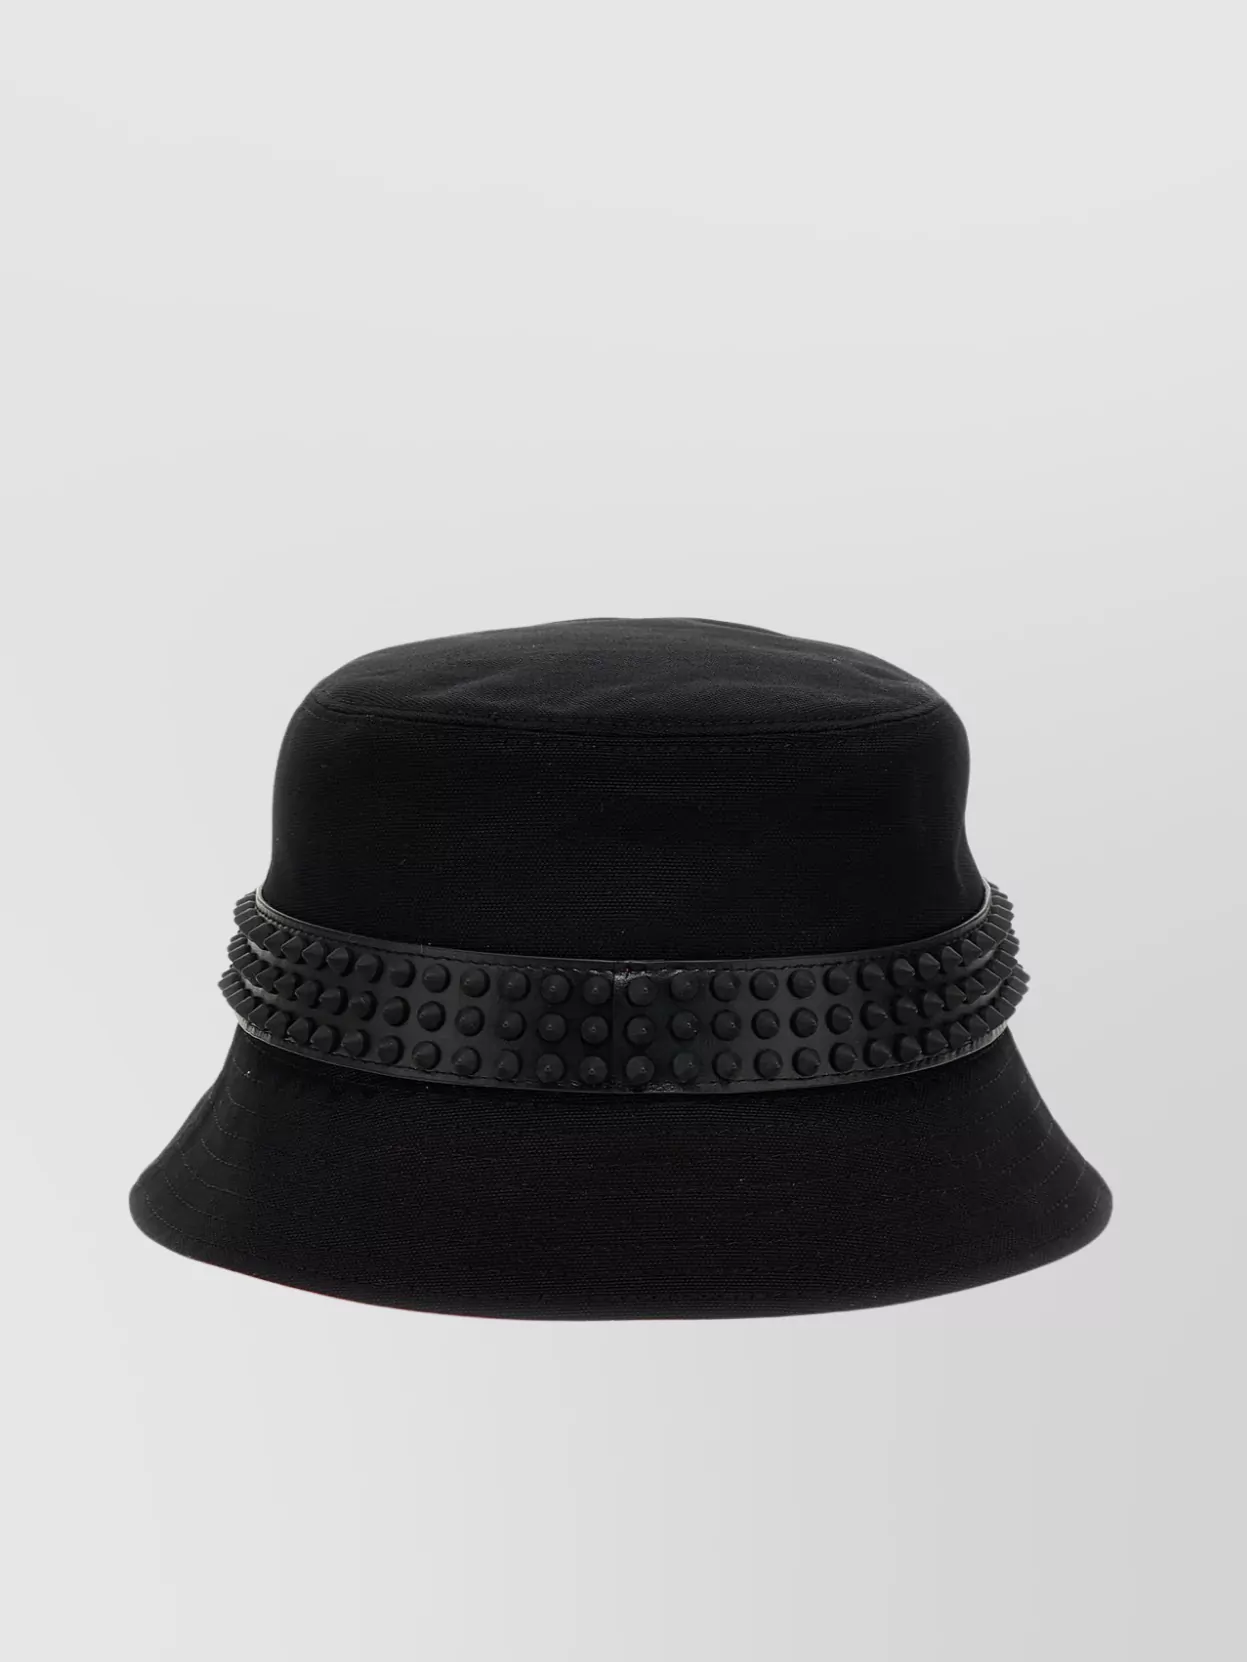 Christian Louboutin Spiked Band Bucket Hat In Black